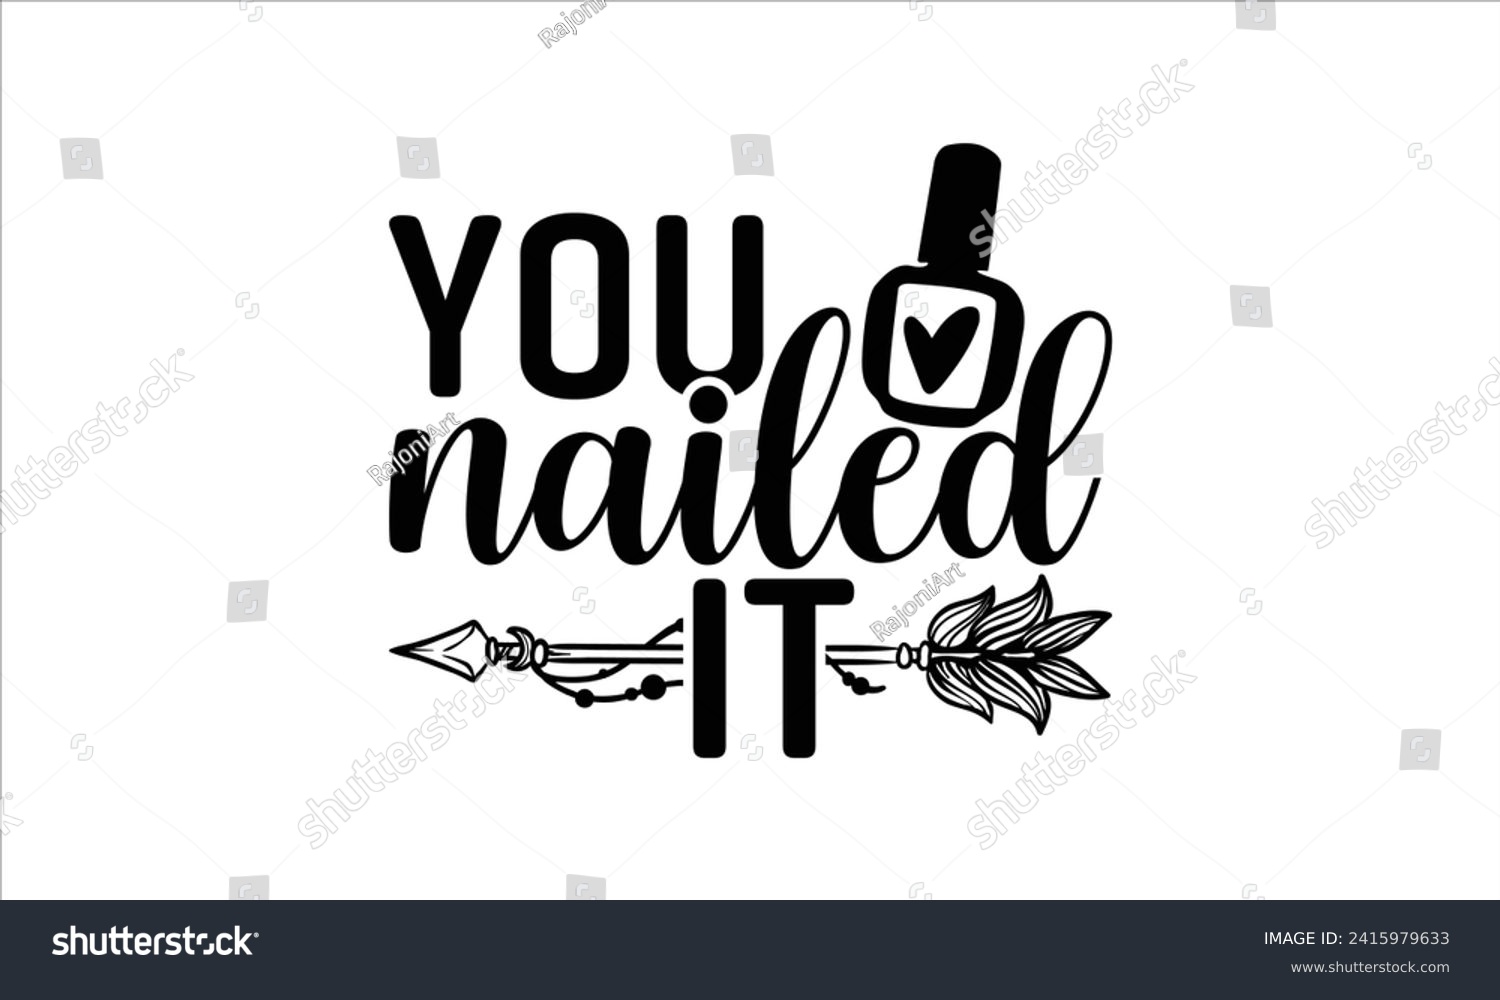 SVG of You nailed it - Nail Tech T-Shirt Design, Vector illustration with hand drawn lettering, Silhouette Cameo, Cricut, Modern calligraphy, Mugs, Notebooks, white background. svg